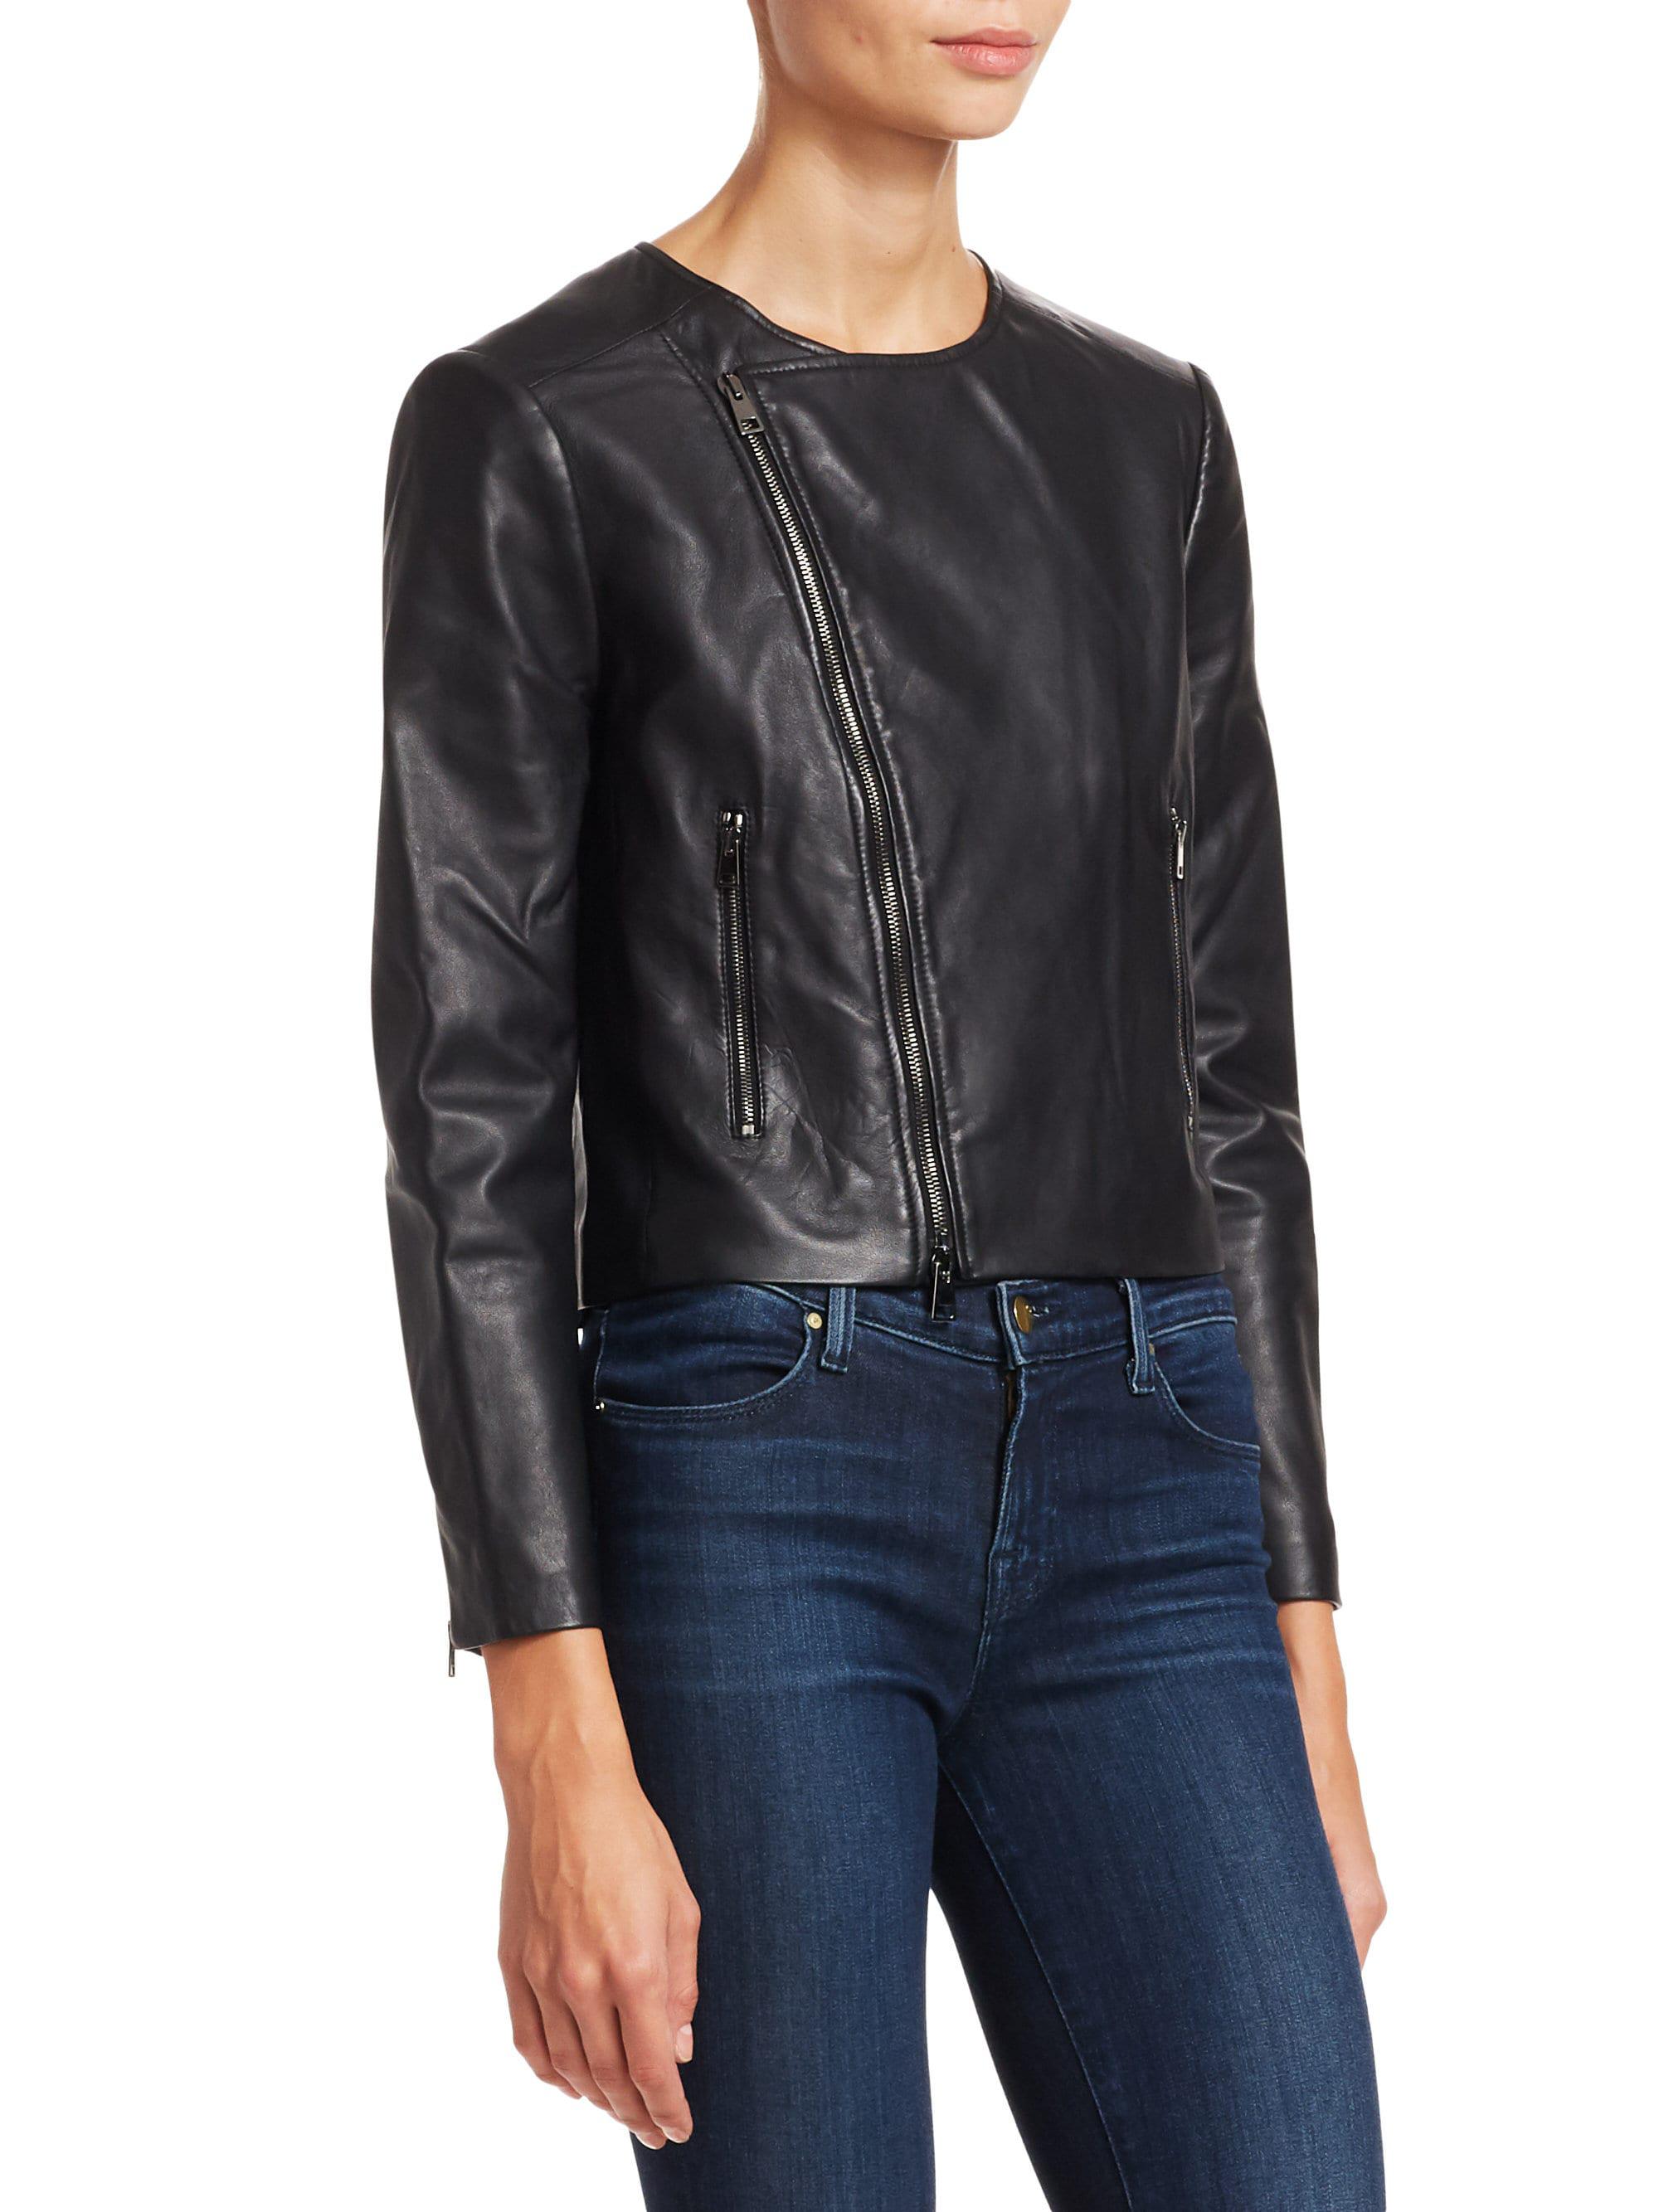 Theory Clean Leather Moto Jacket in Black - Lyst